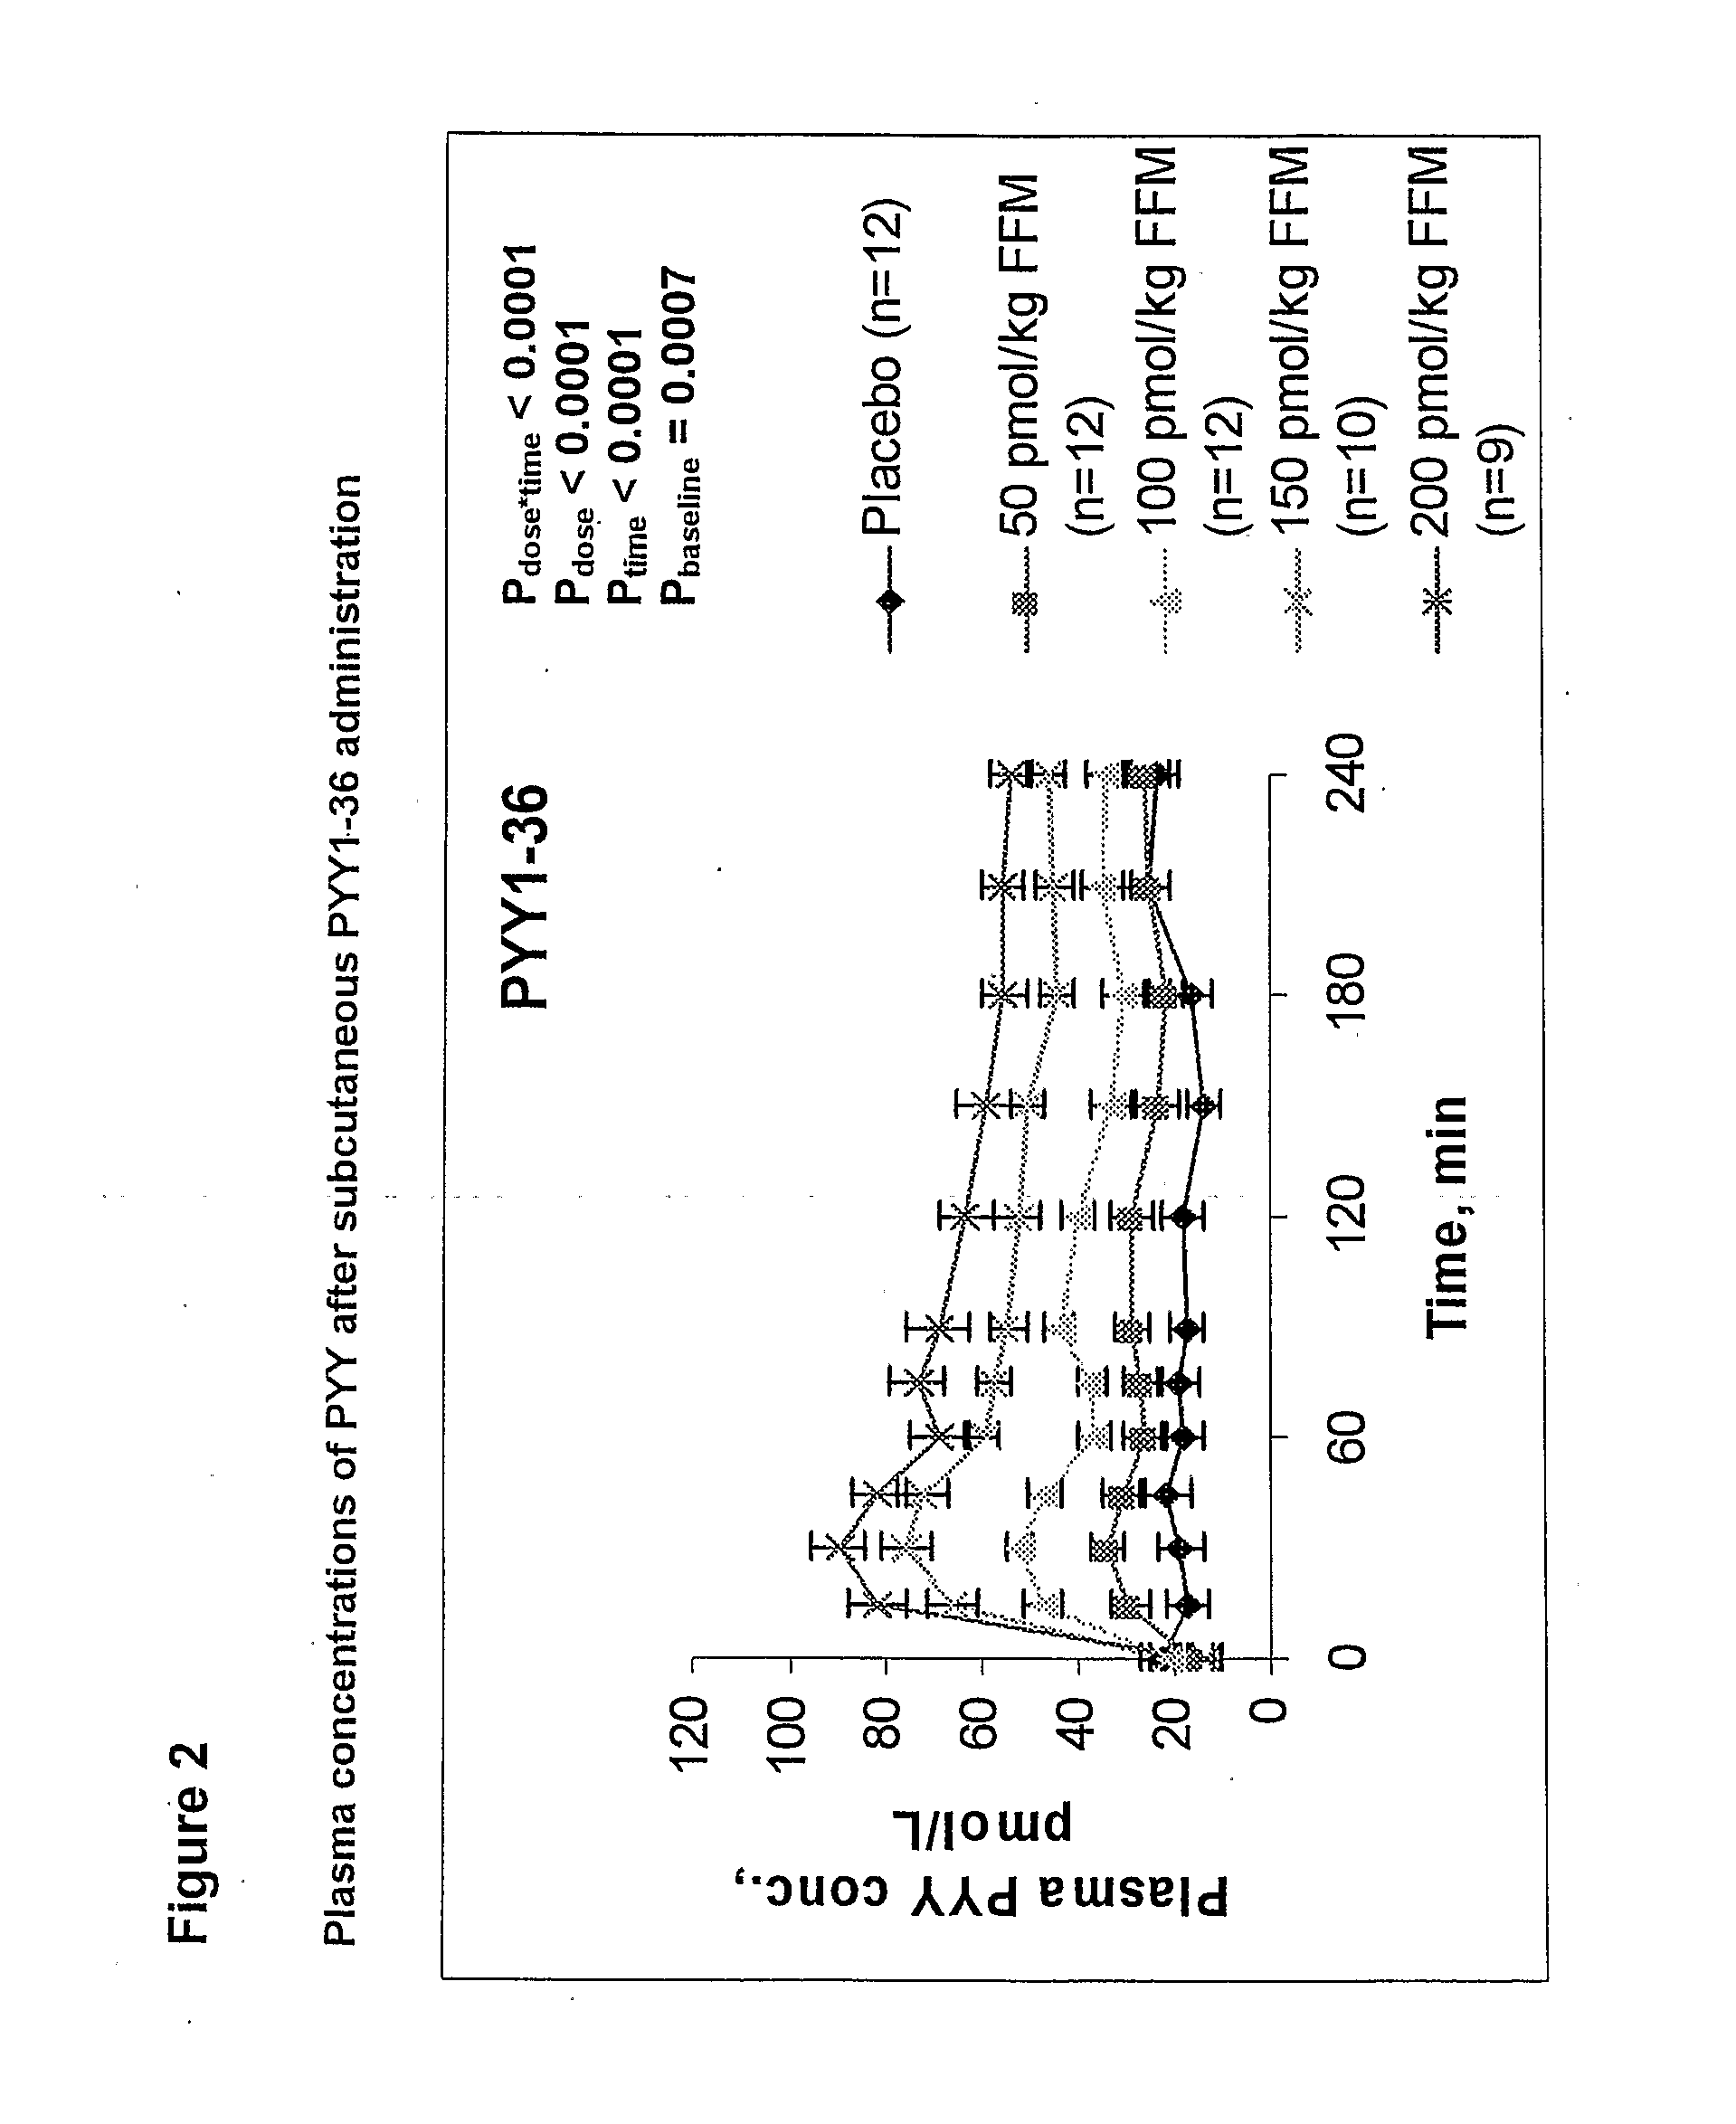 Composition Comprising Pyy for the Treatment of Gastrointestinal Disorders